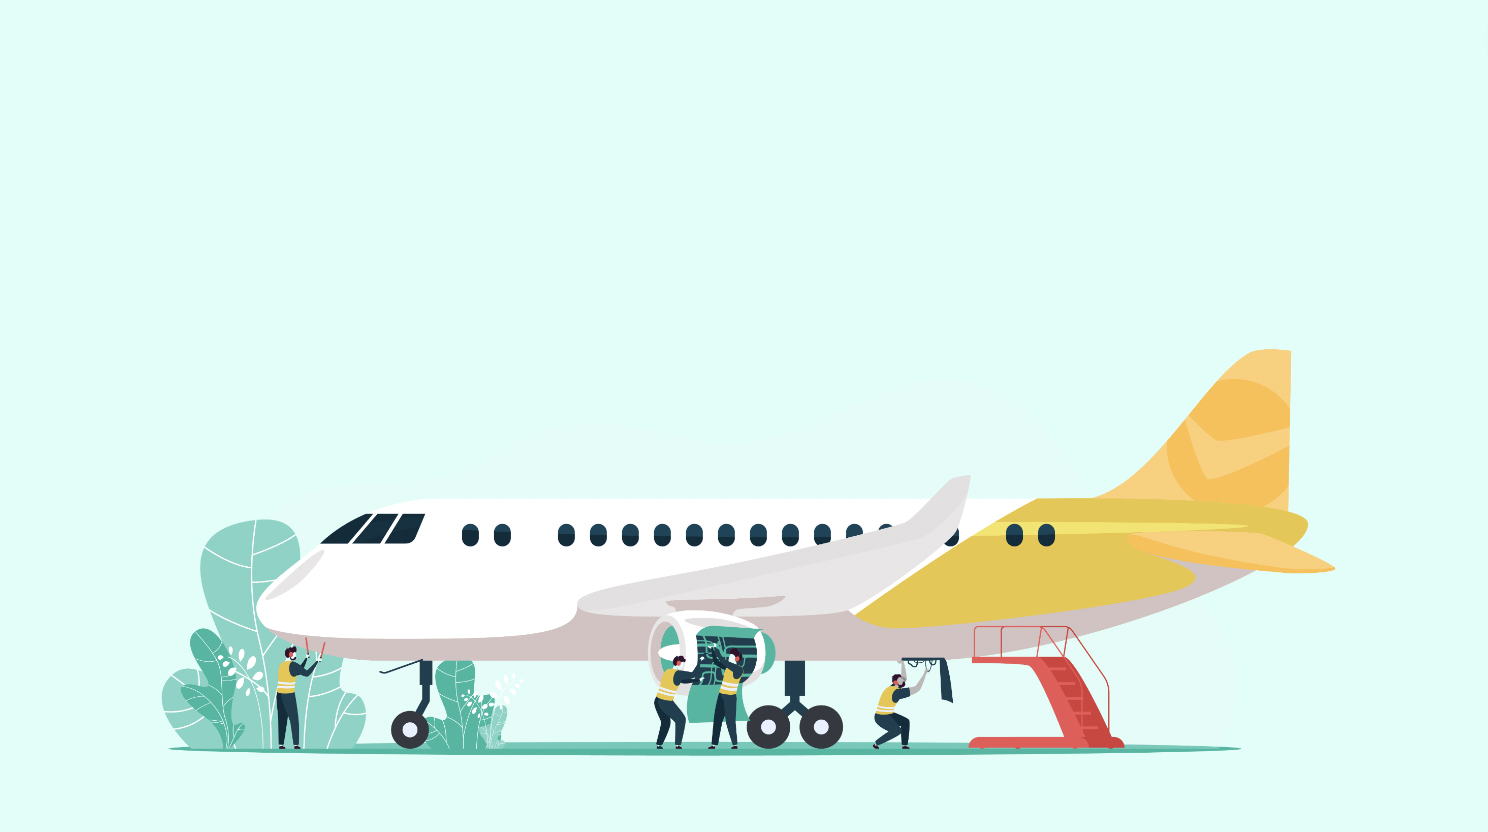 Group of illustrated airline employees with financial wellbeing as a benefit